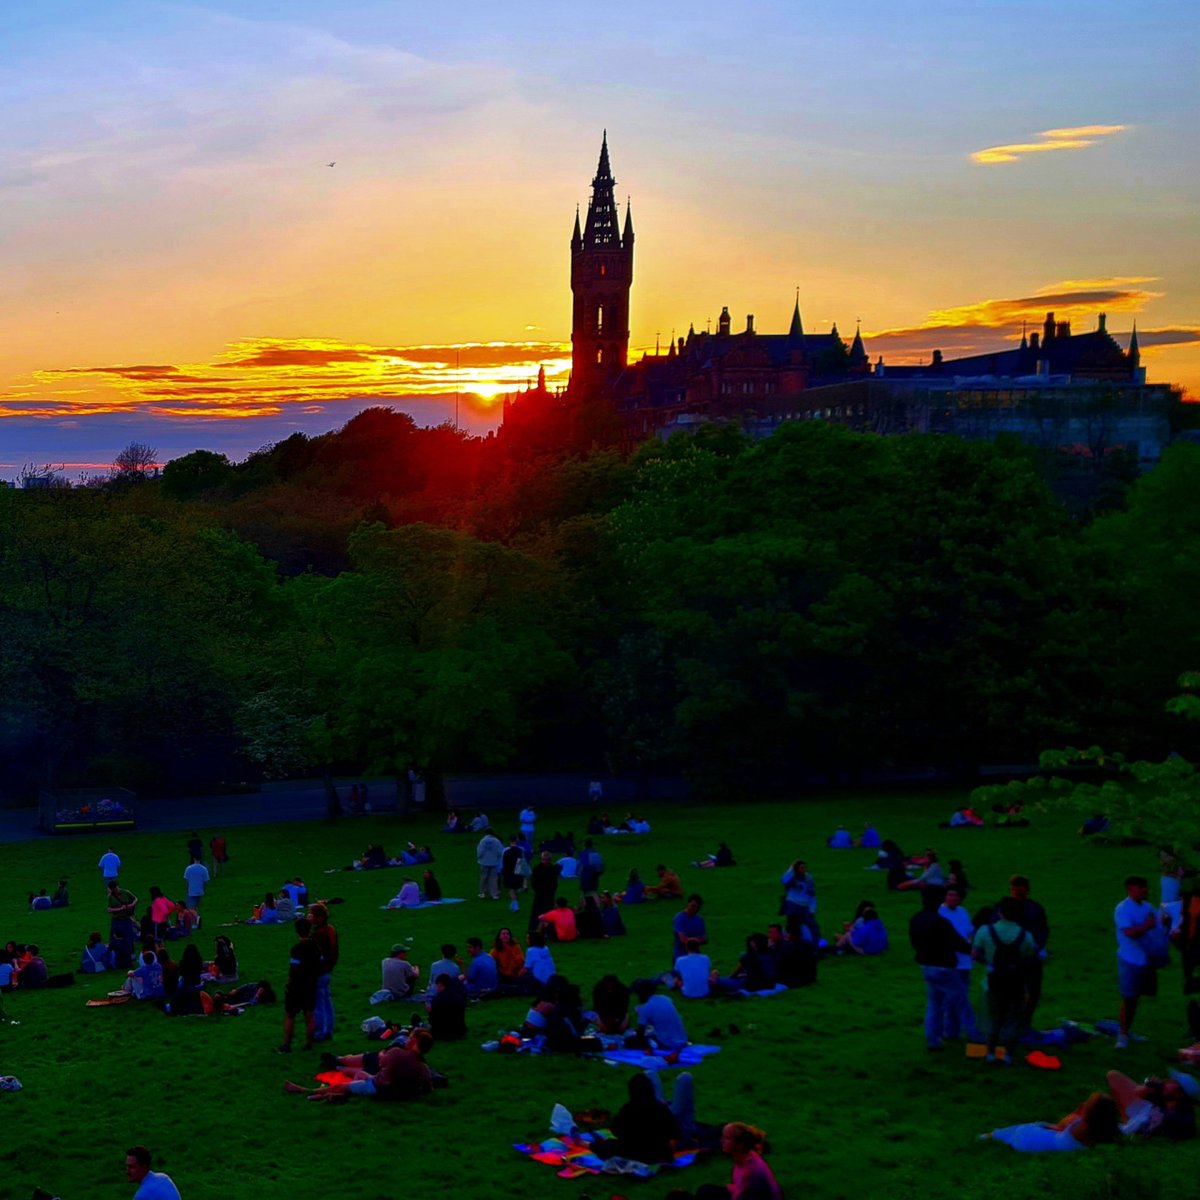 The sun setting just now over Kelvingrove Park in Glasgow on what has felt like the first proper day of Summer. #glasgow #kelvingrovepark #summer #glasgowuniversity #sunset #glasgowsunset #glasgowtoday